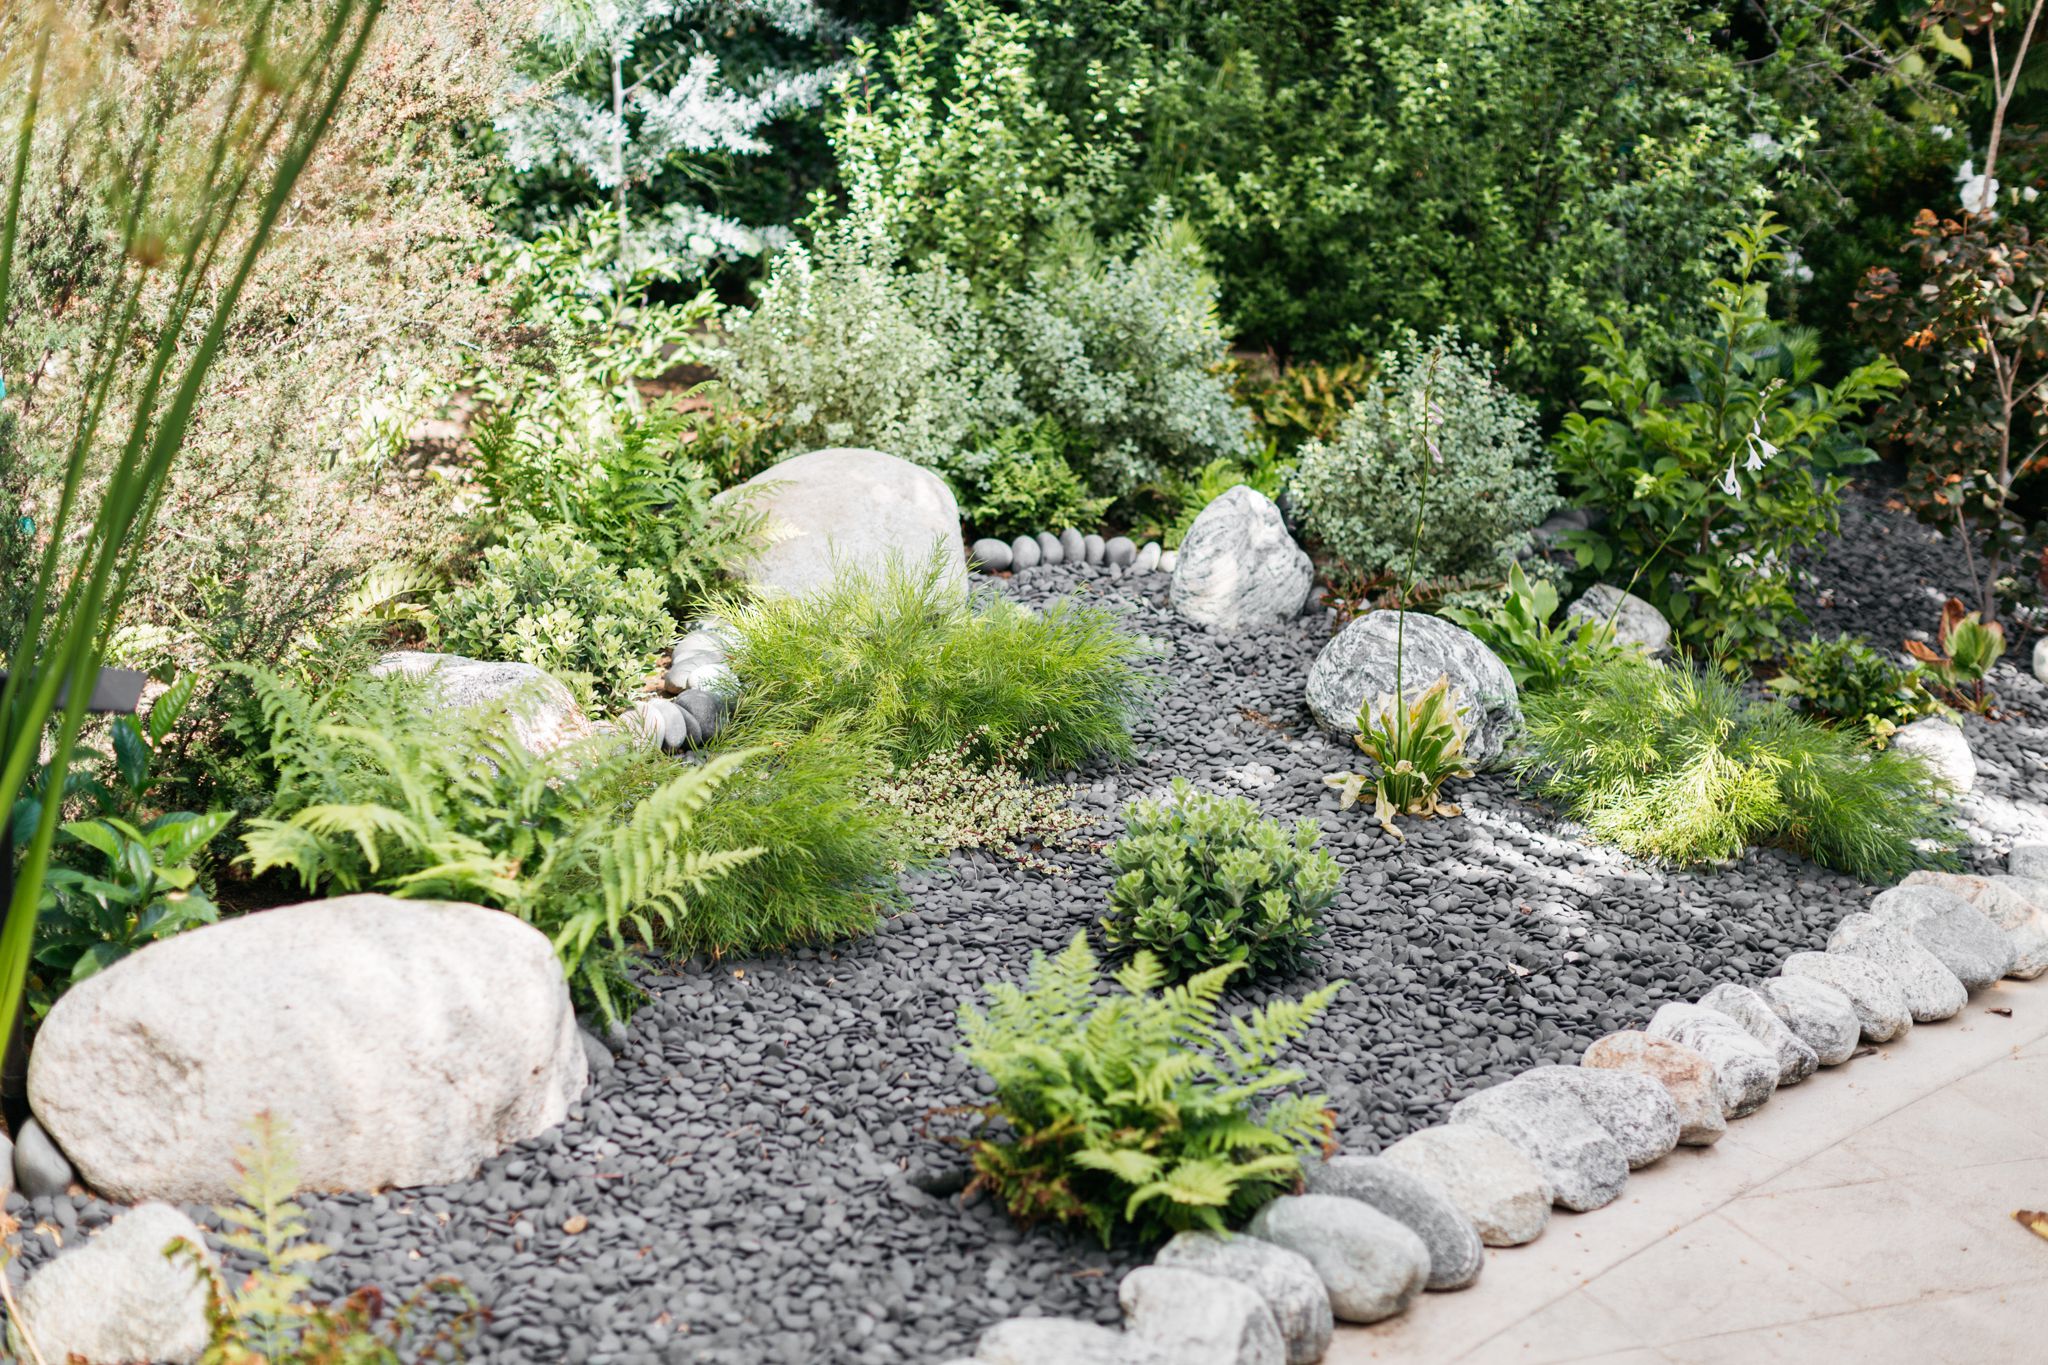 How to create artificial rocks in the garden